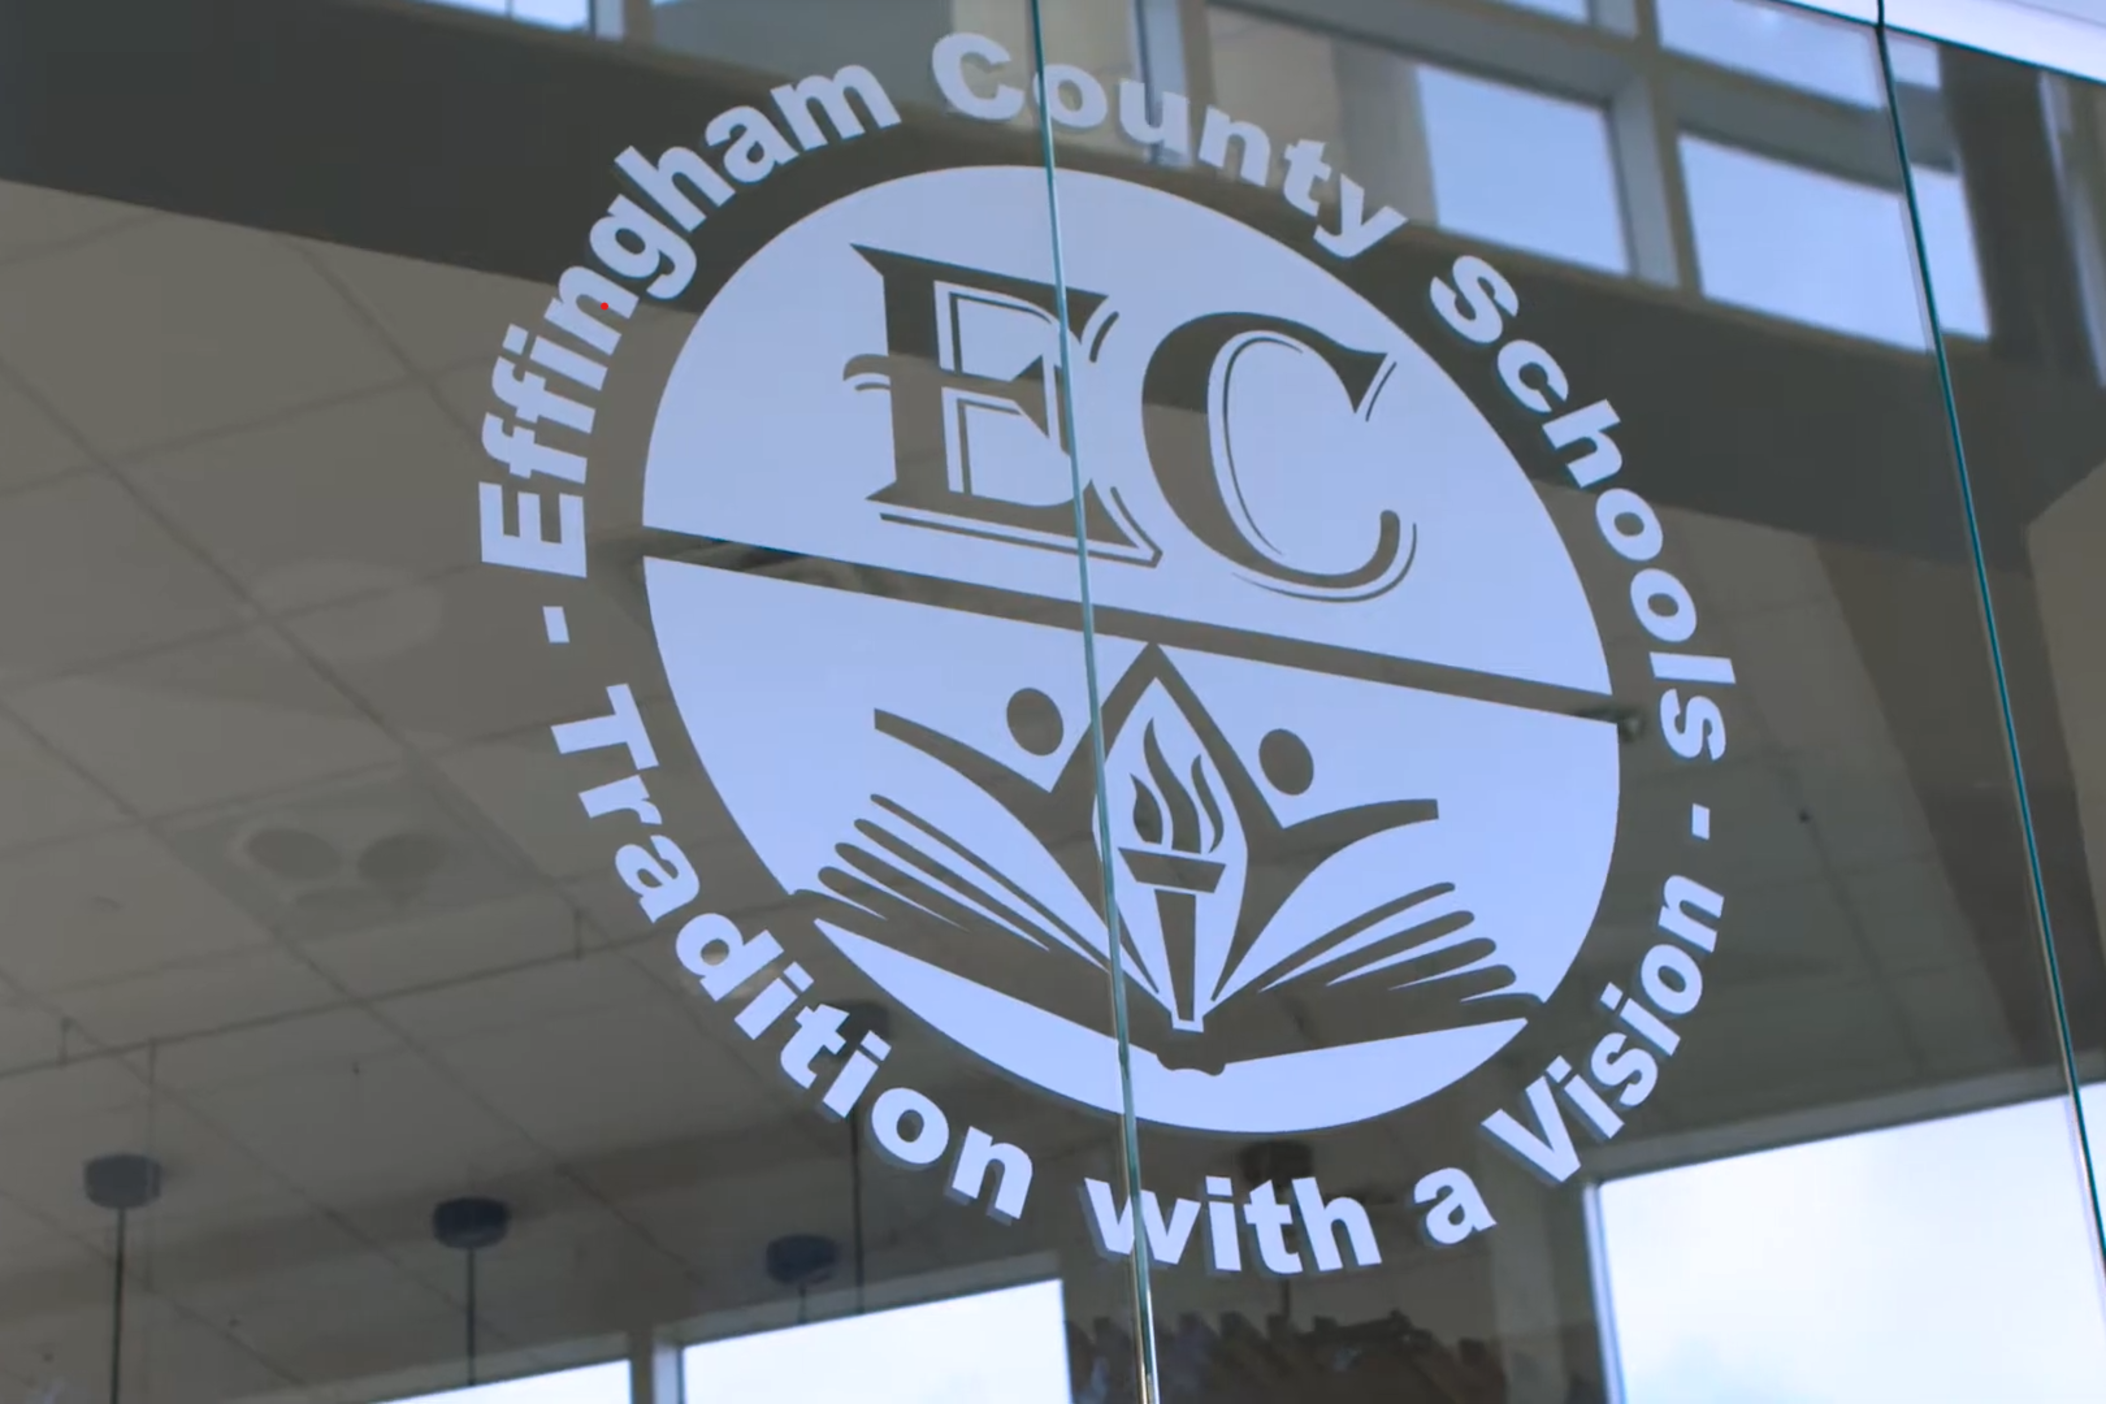 The Effingham County School District logo is displayed on a clear glass wall inside a building.